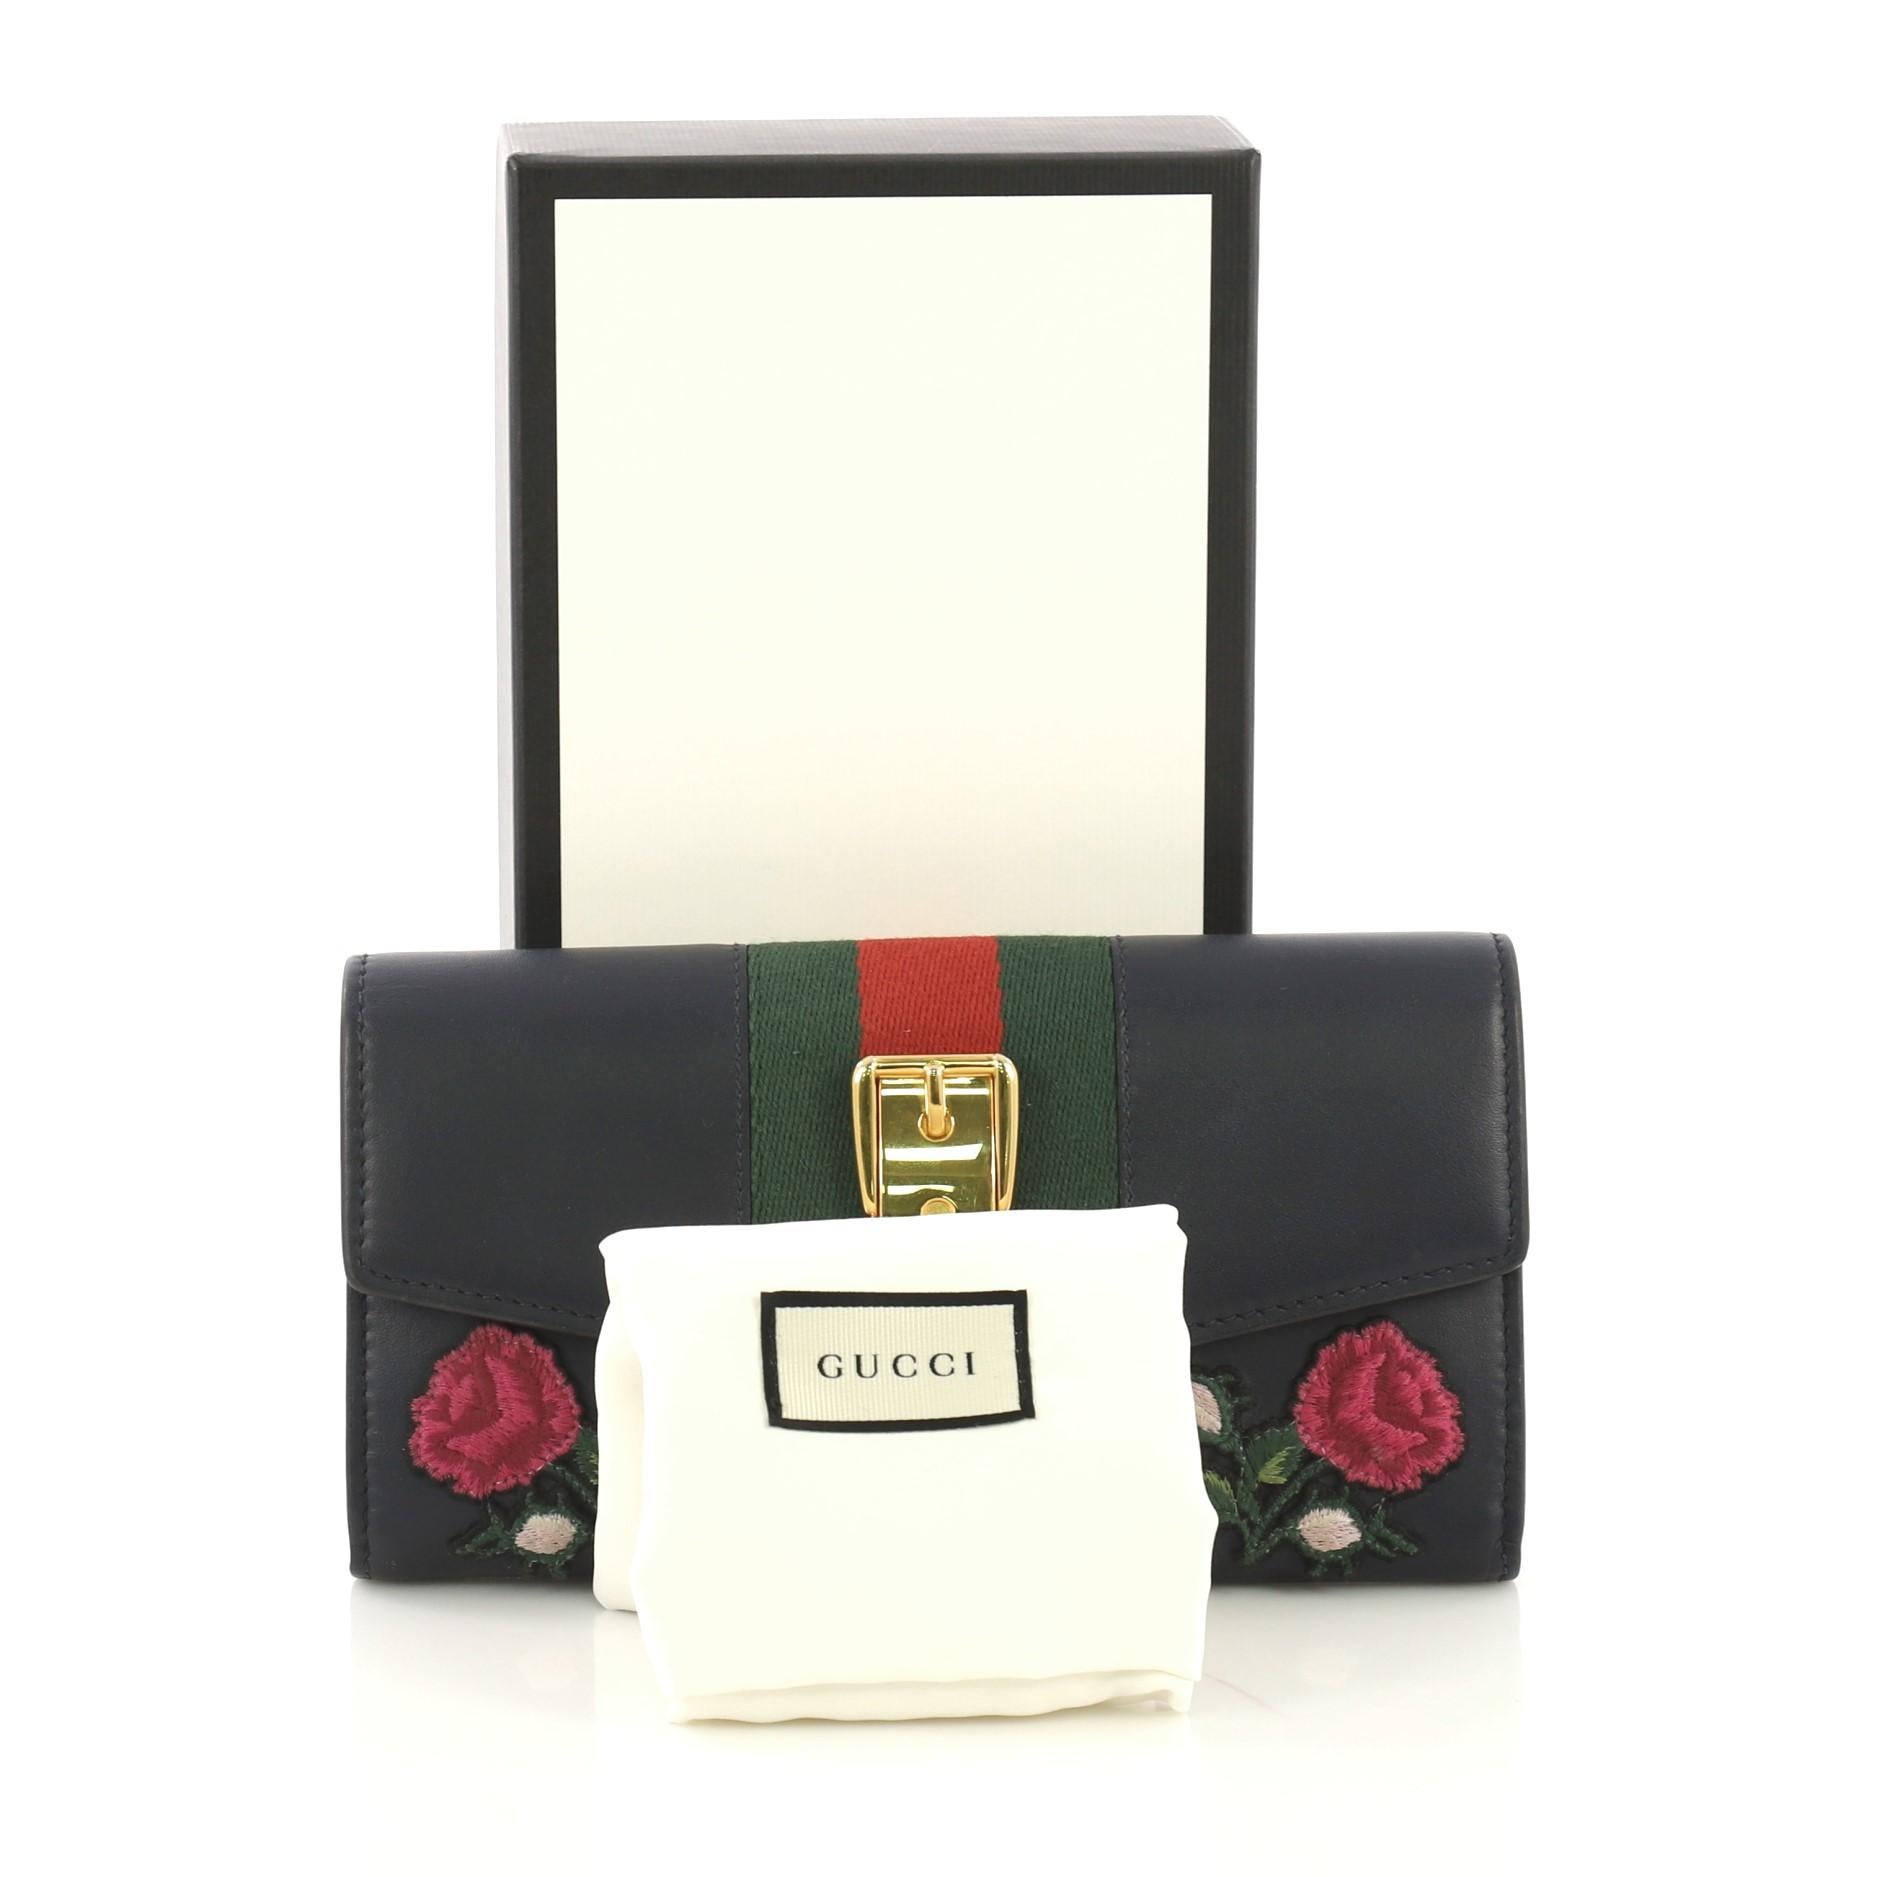 This Gucci Sylvie Continental Wallet Embroidered Leather, crafted from navy embroidered leather, features the signature Gucci web detail with buckle accents and gold-tone hardware. It opens to a navy leather and fabric interior with multiple card